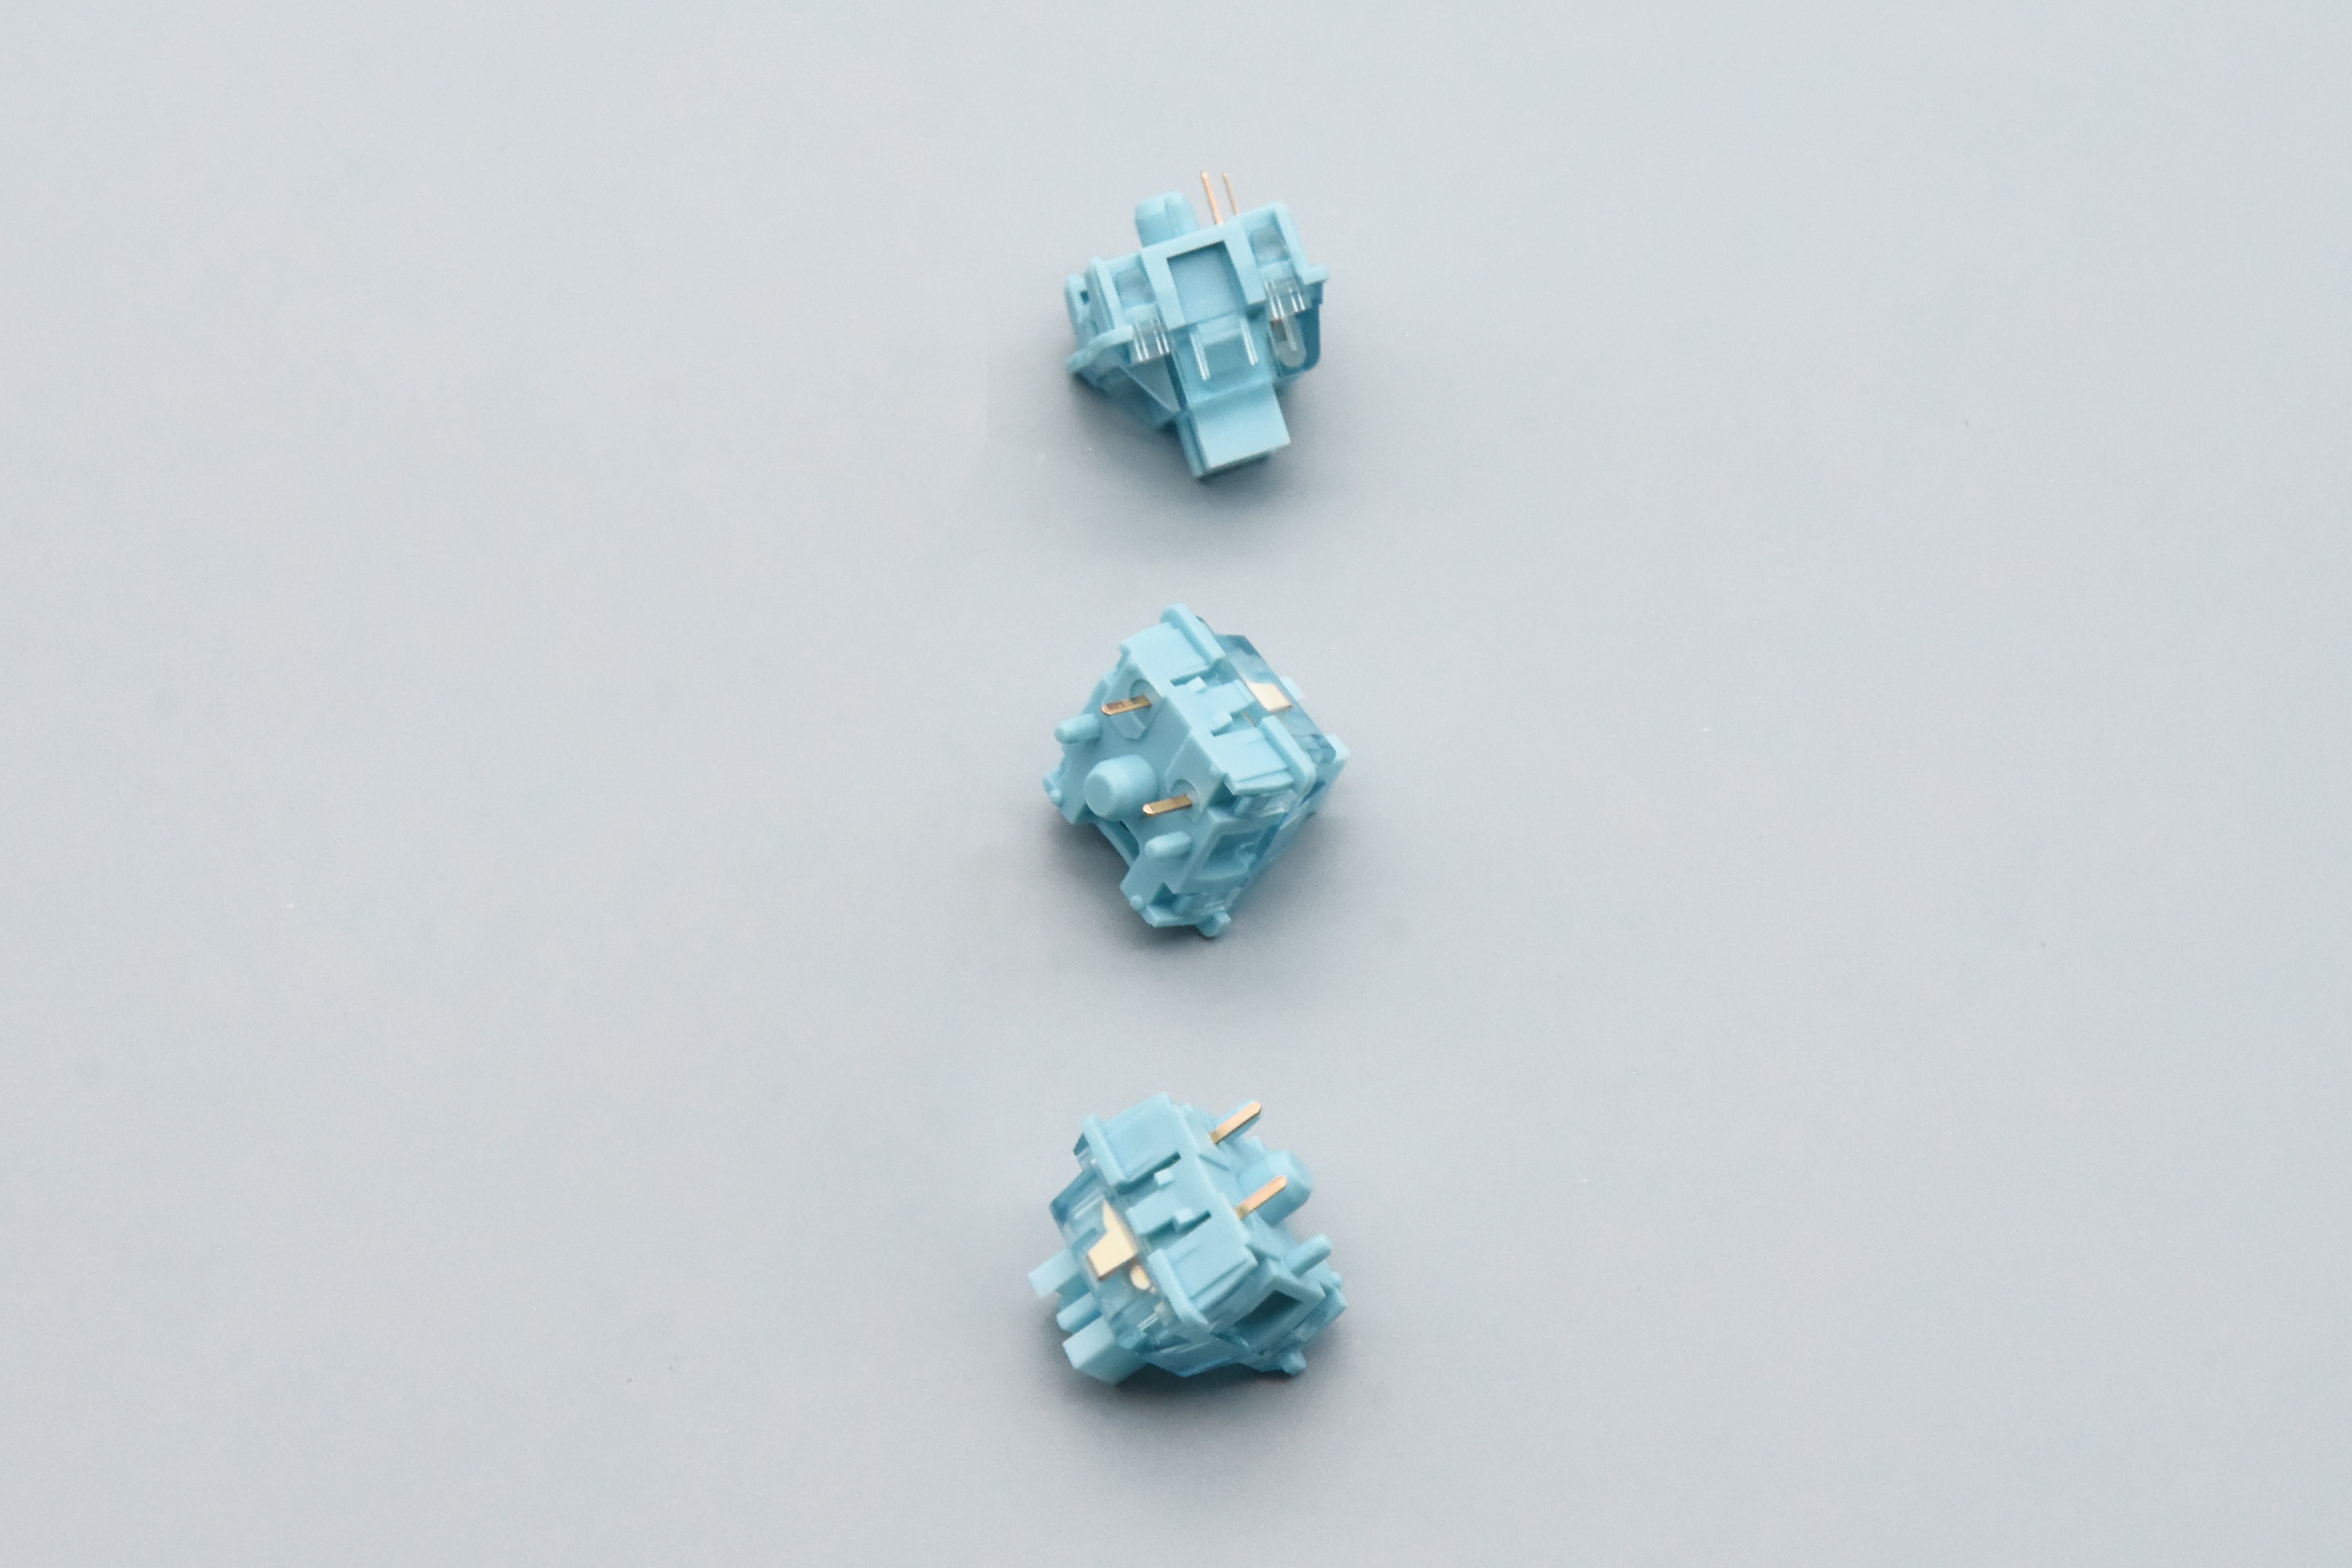 AKKO V3 CREAM BLUE PRO TACTILE SWITCH FACTORY LUBED EDITION (10PCS)